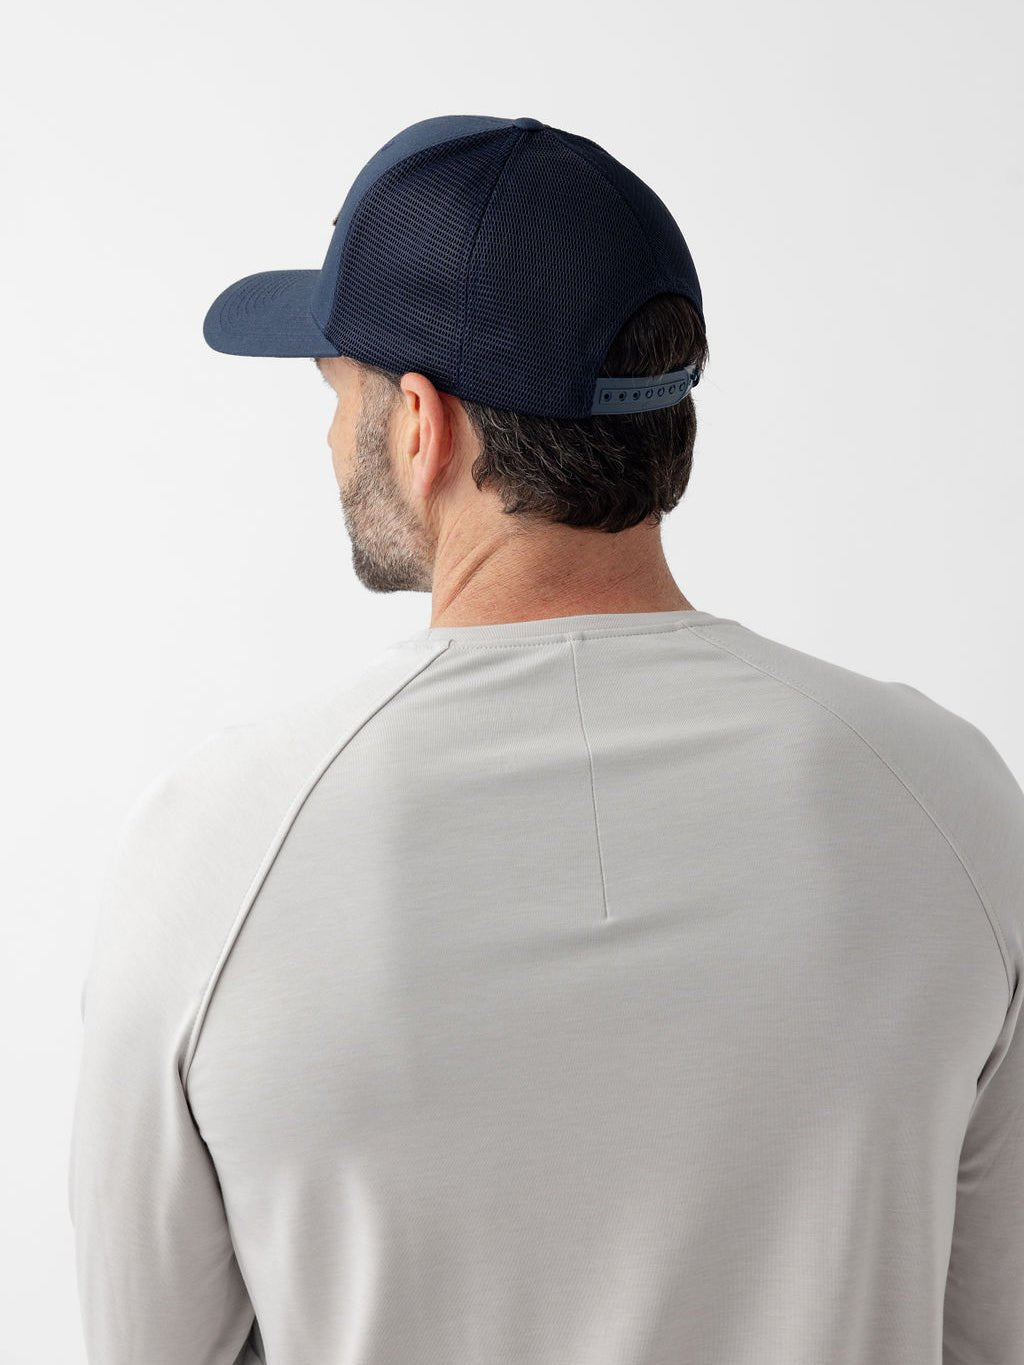 Back and side view of man wearing navy diamond mesh trucker hat 